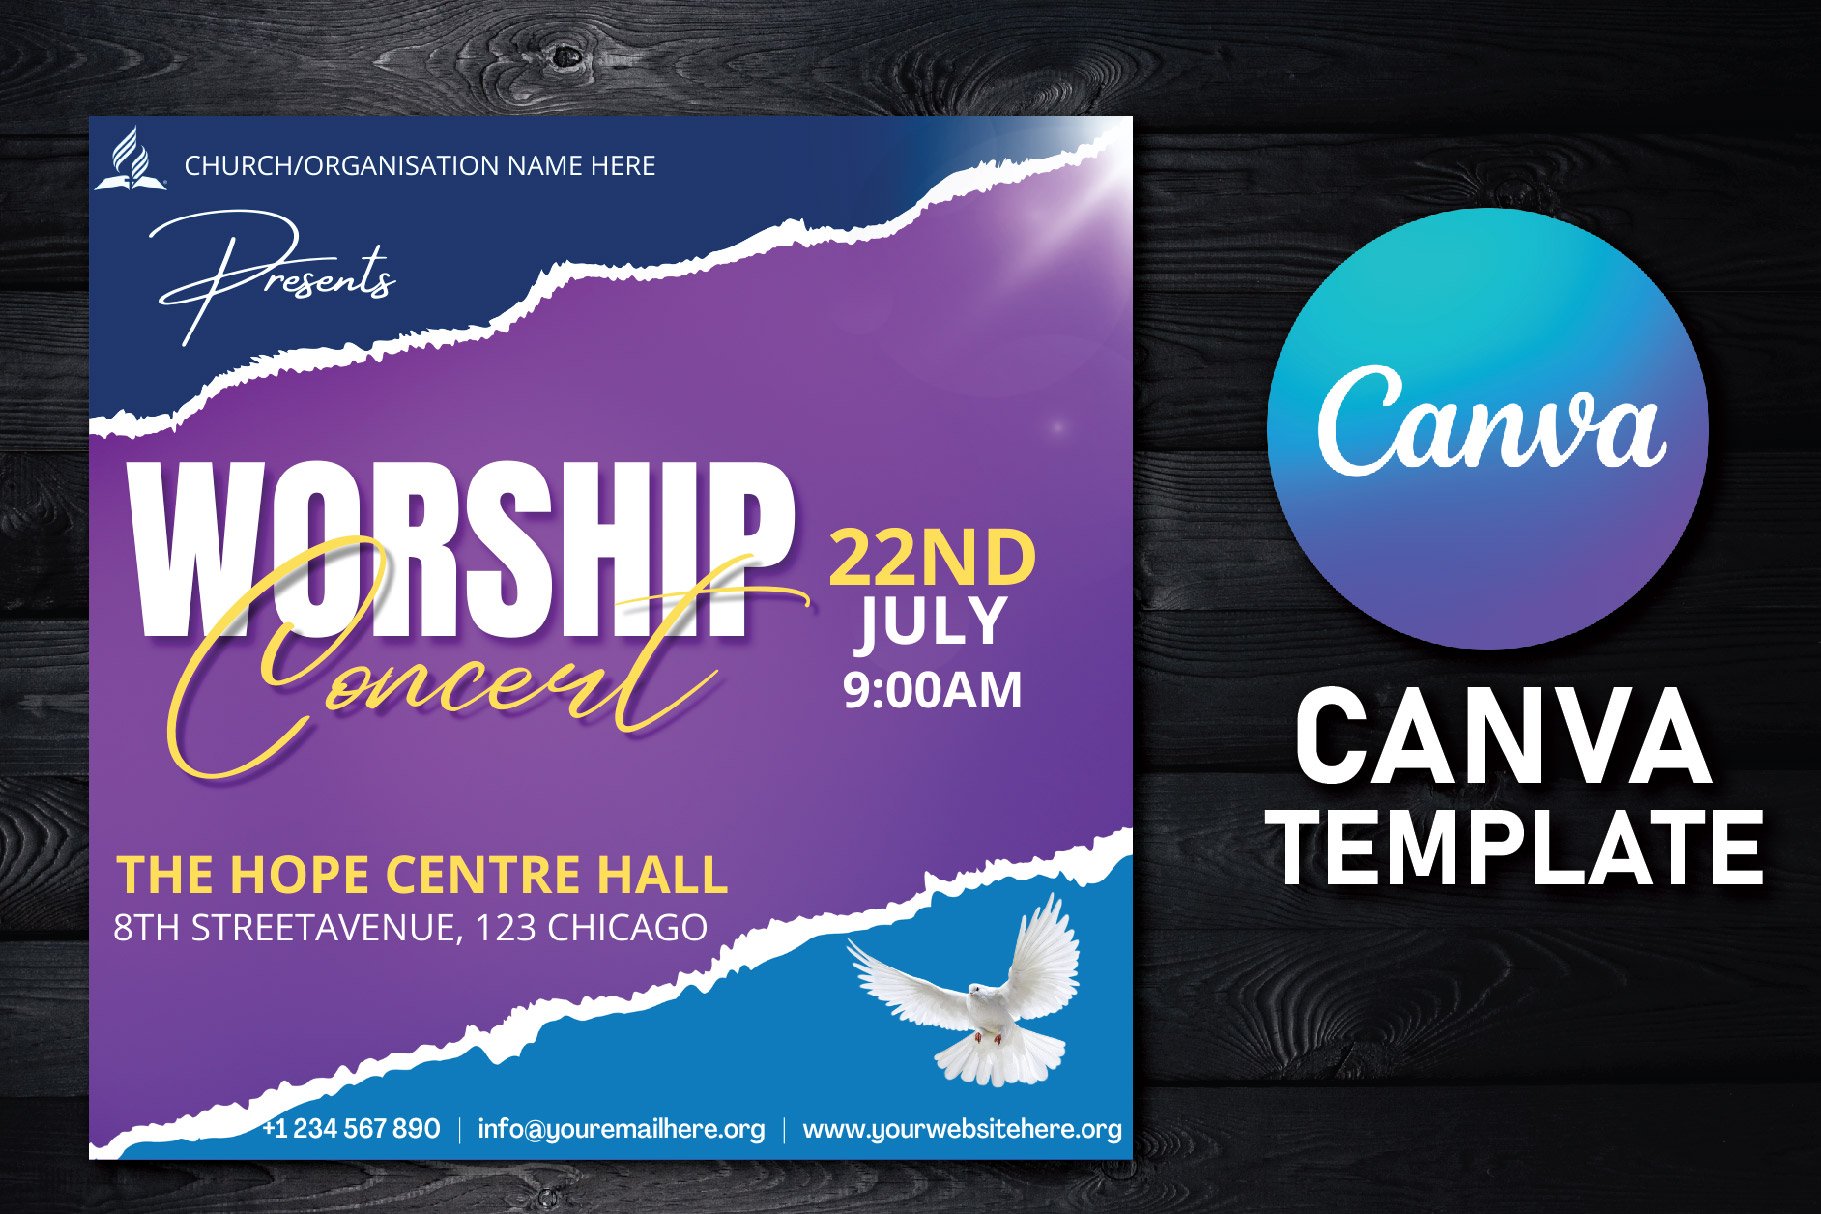 Worship Concert Canva Template cover image.